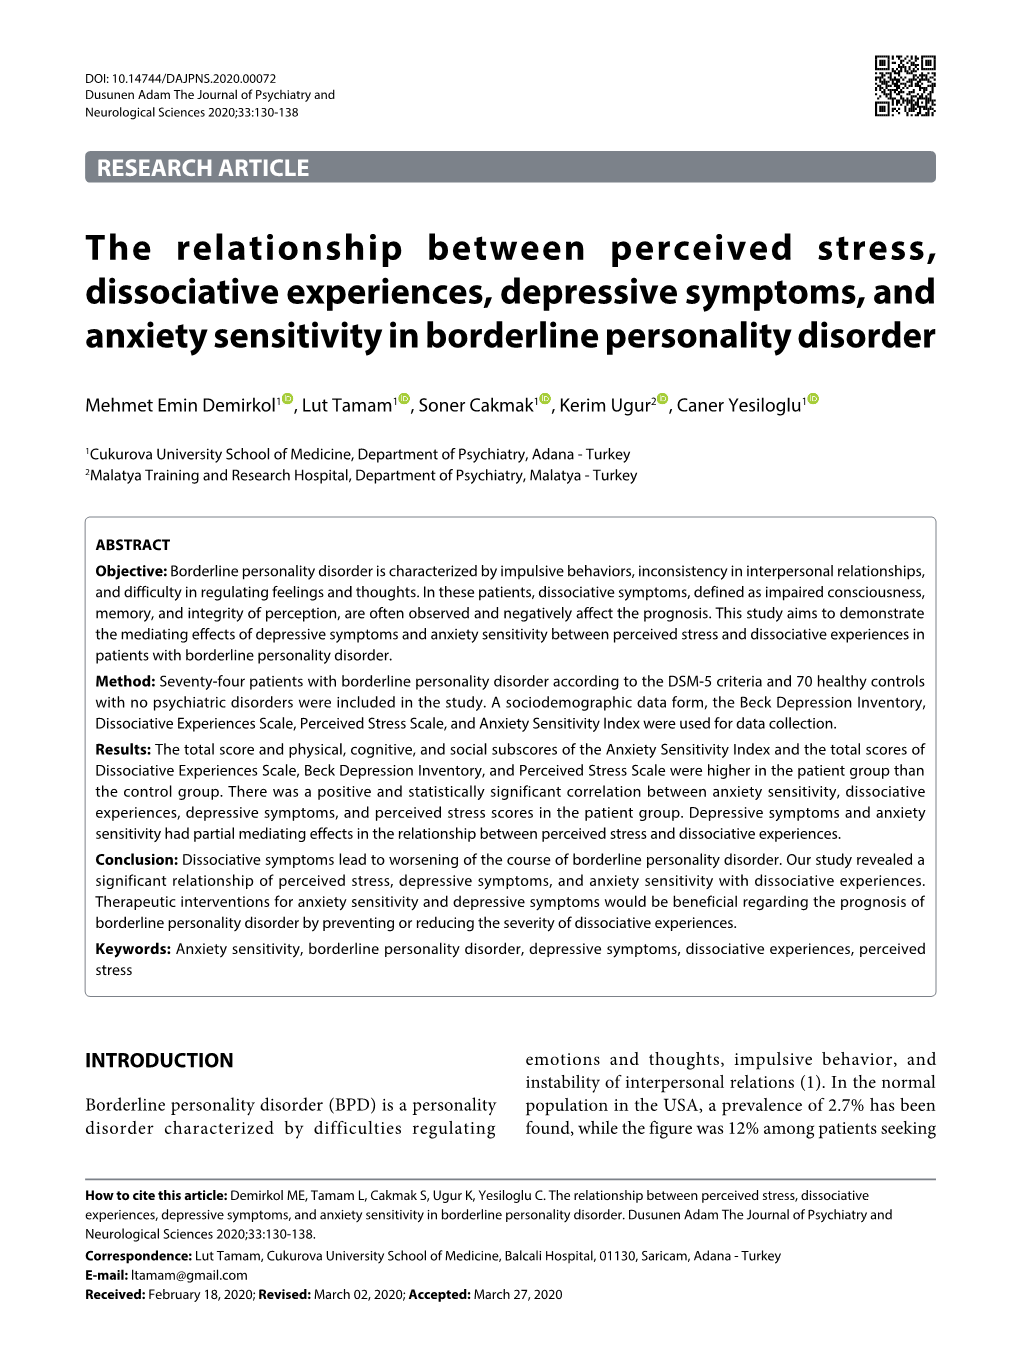 The Relationship Between Perceived Stress, Dissociative Experiences, Depressive Symptoms, and Anxiety Sensitivity in Borderline Personality Disorder